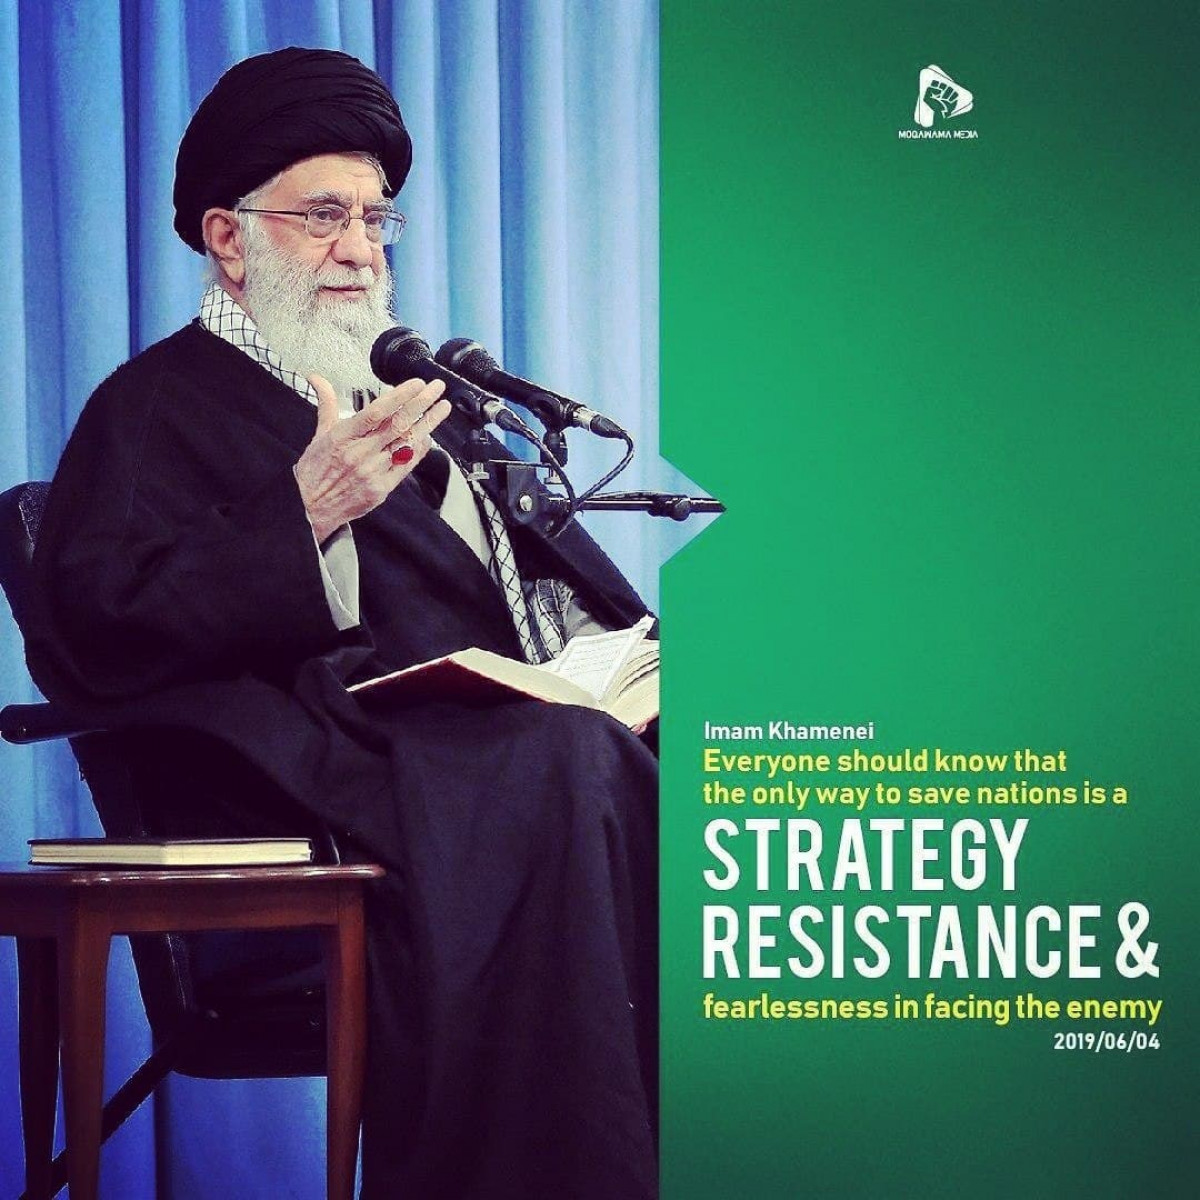 Everyone should know that the only way to save nations is a Strategy Resistance & fearless in facing the enemy